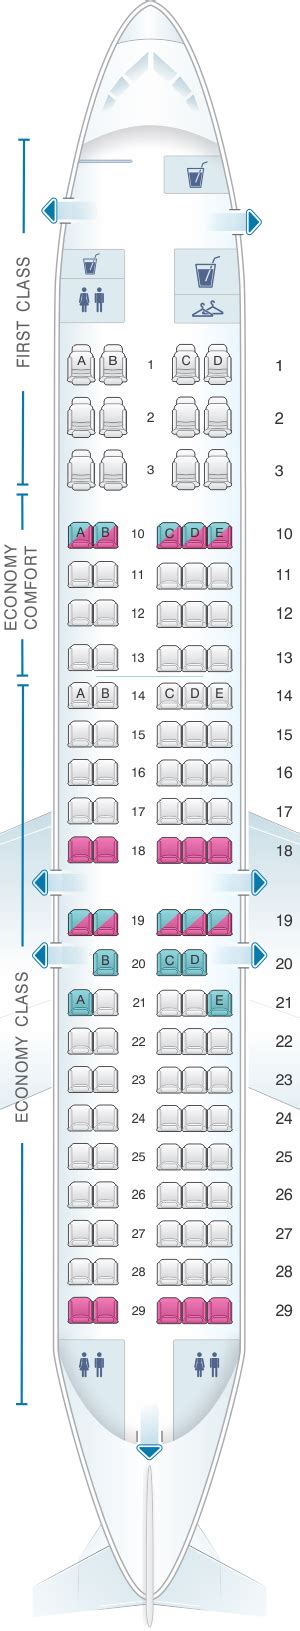 Delta airline seating chart. Take a look at Delta's new Sky Club at LAX, featuring an outdoor deck overlooking the Hollywood Hills. Inside the Delta Sky Club at LAX, one of the newest lounges in the system. Delta Air Lines recently overhauled its loyalty program, including restricting Sky Club lounge access. The moves comes as the airline opens several new lounges in its ... 